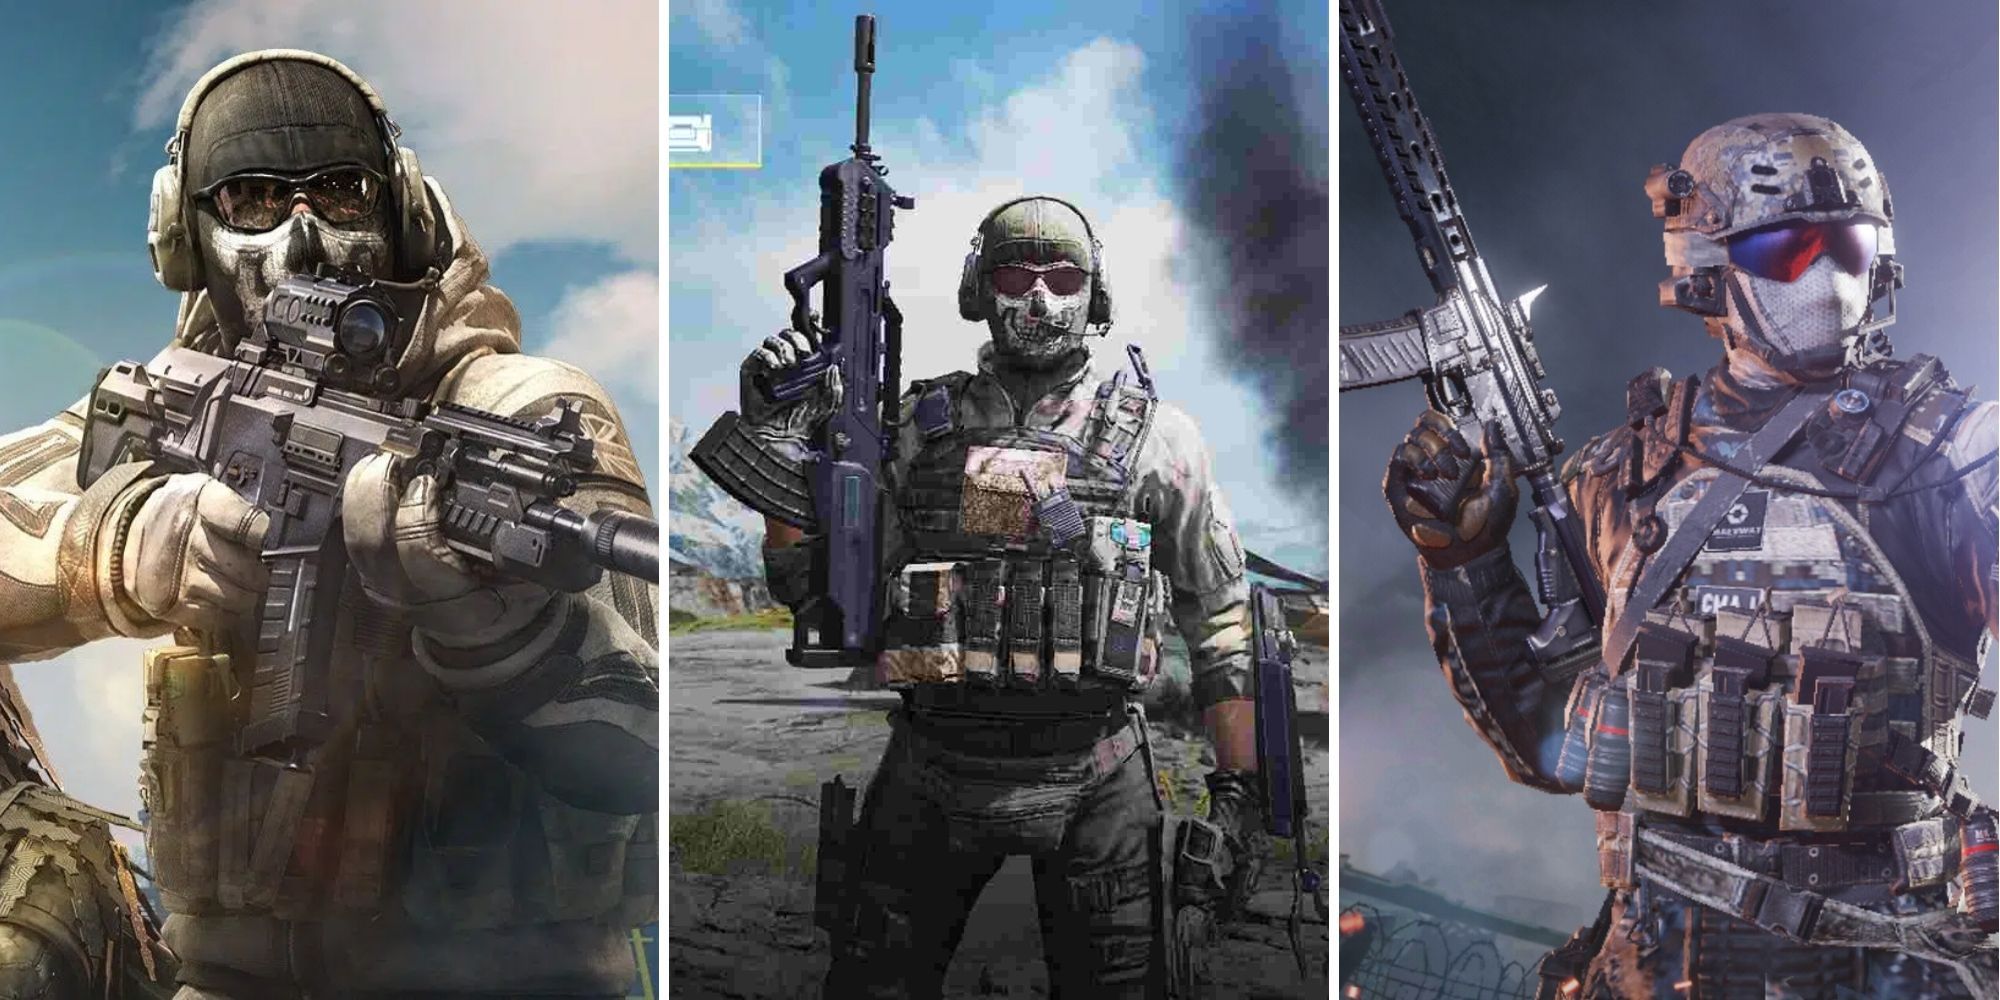 Call of Duty Mobile a Weapon Guide of Semi-Automatic Sniper Rifle